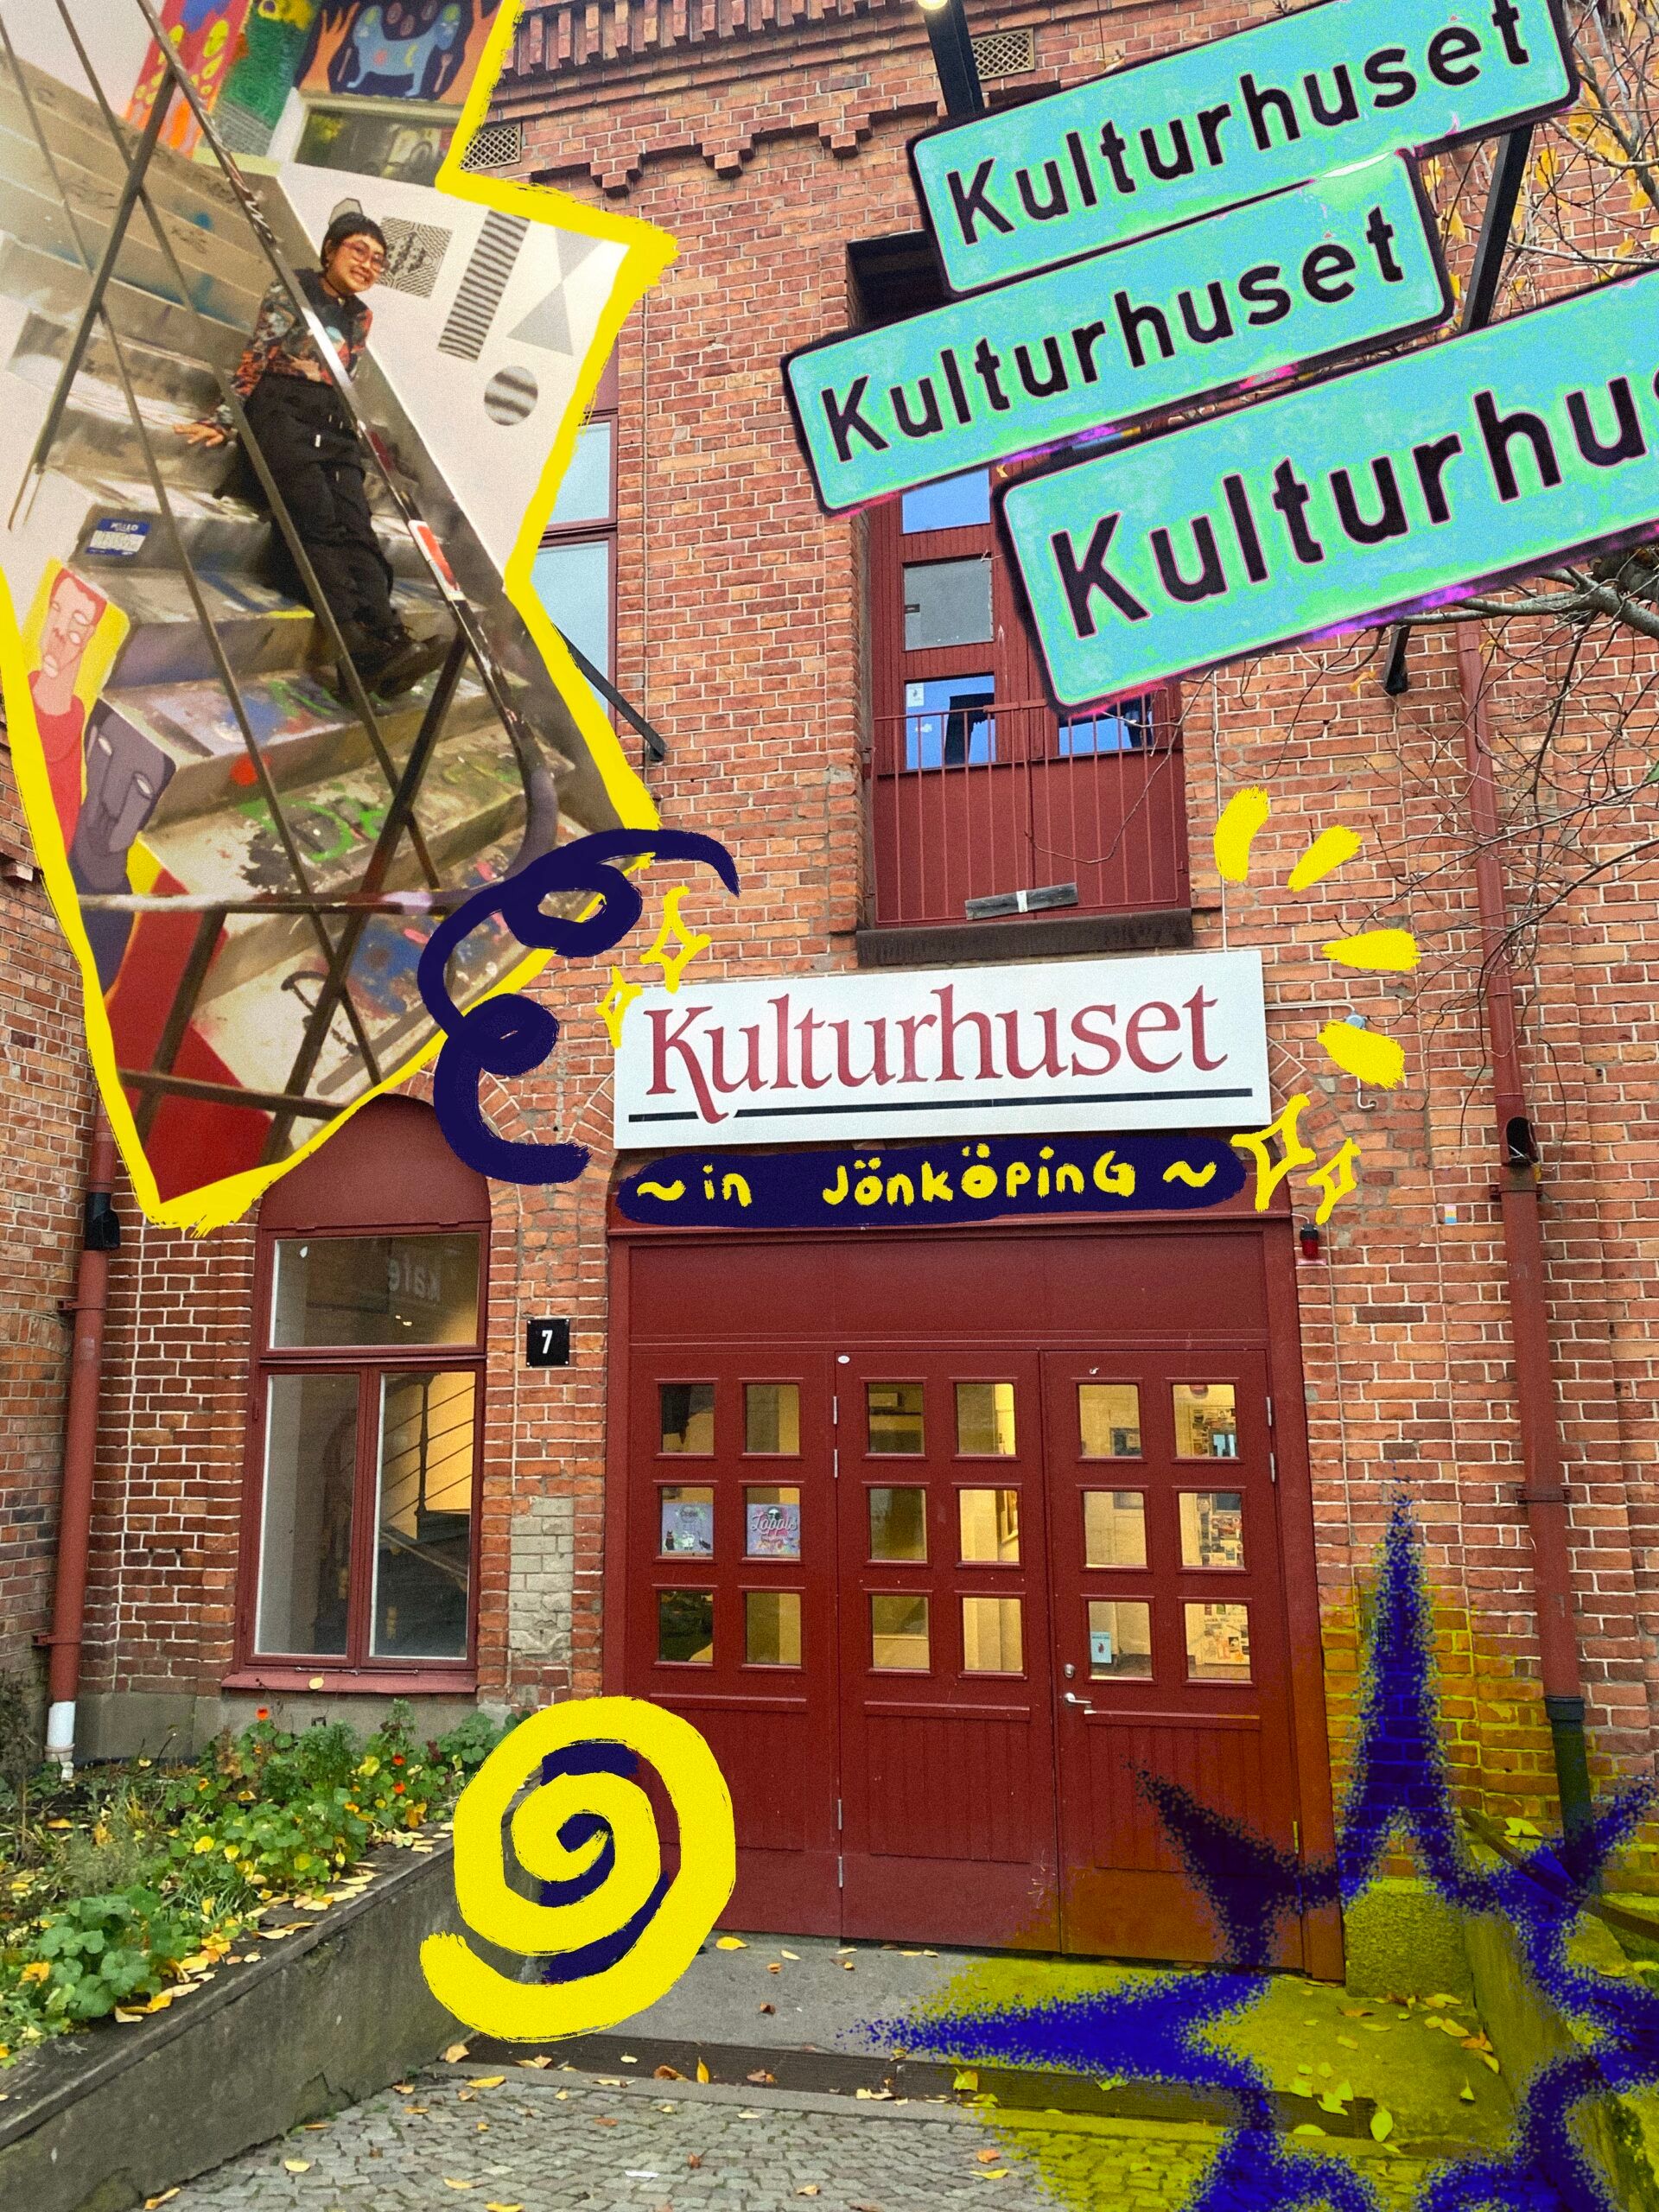 Kulturhuset as an art and culture centre for Swedish and international students in most cities and get engaged with local communities